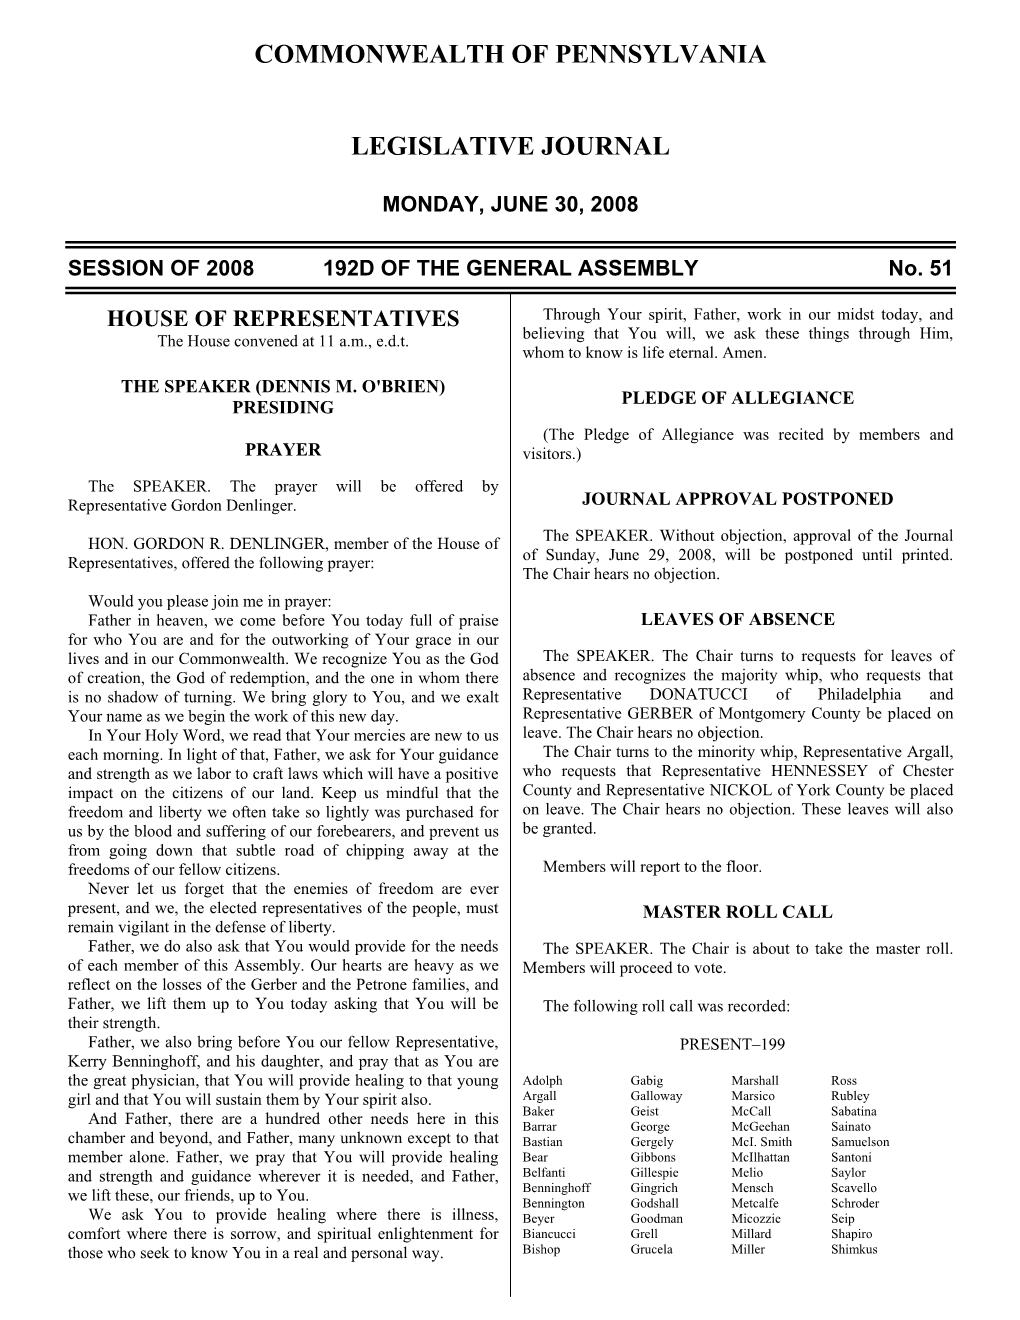 1686 LEGISLATIVE JOURNAL—HOUSE JUNE 30 Health Centers Located in Underserved Areas Or Who Assist Creighton Josephs Payne Taylor, J